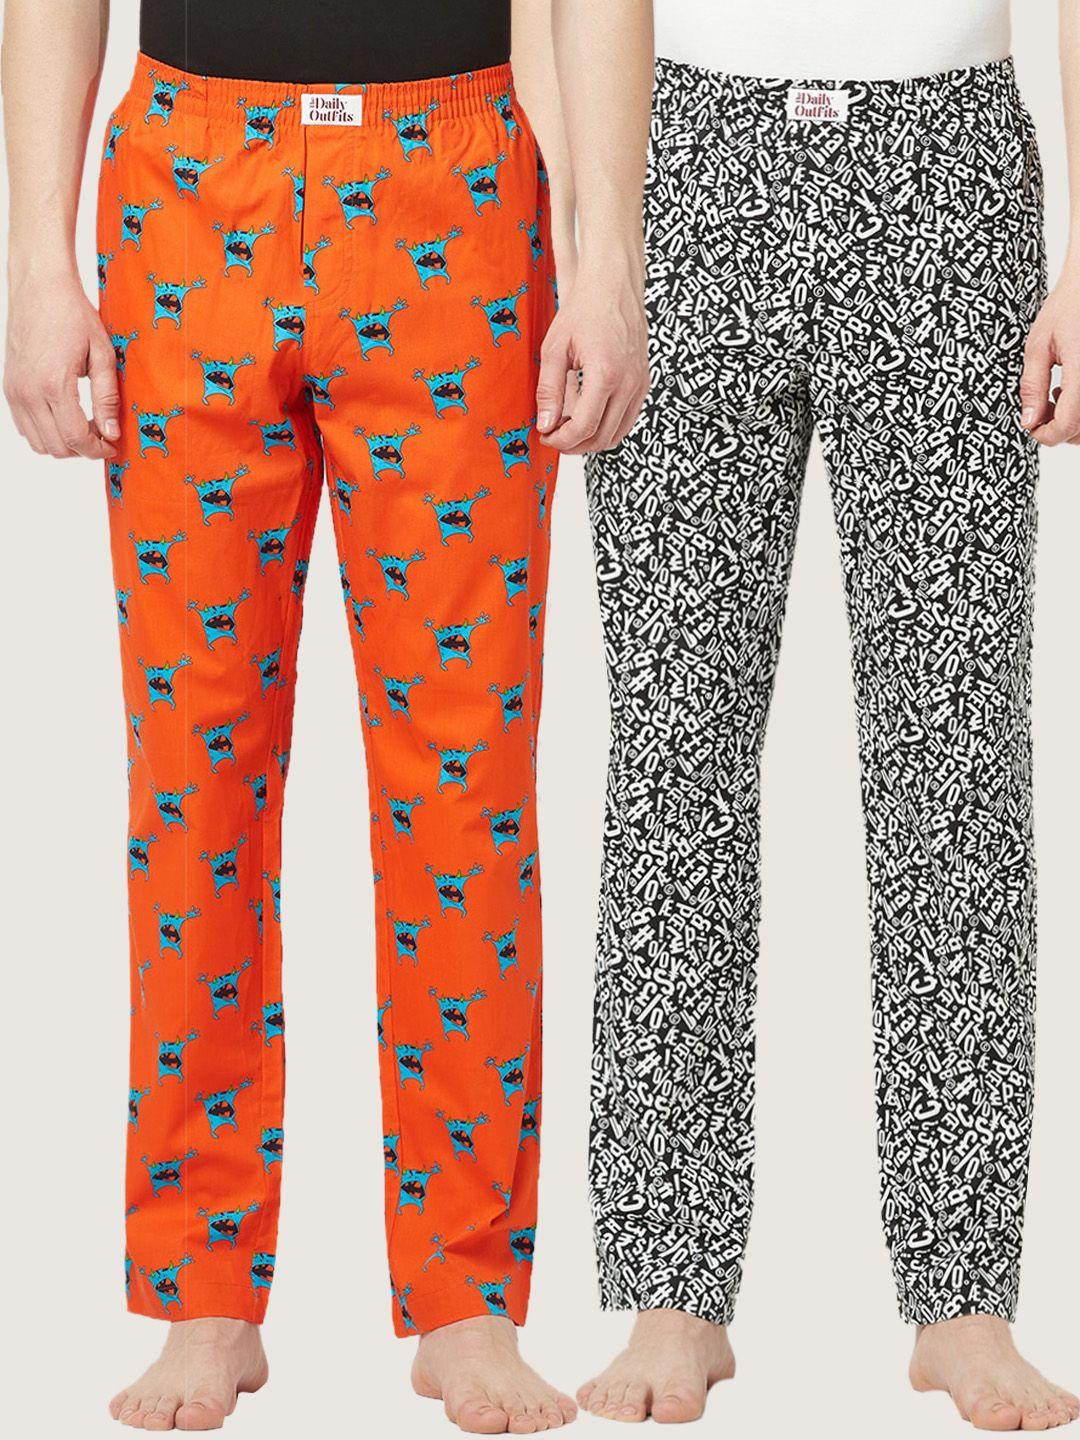 the daily outfits men pack of 2 printed cotton lounge pants